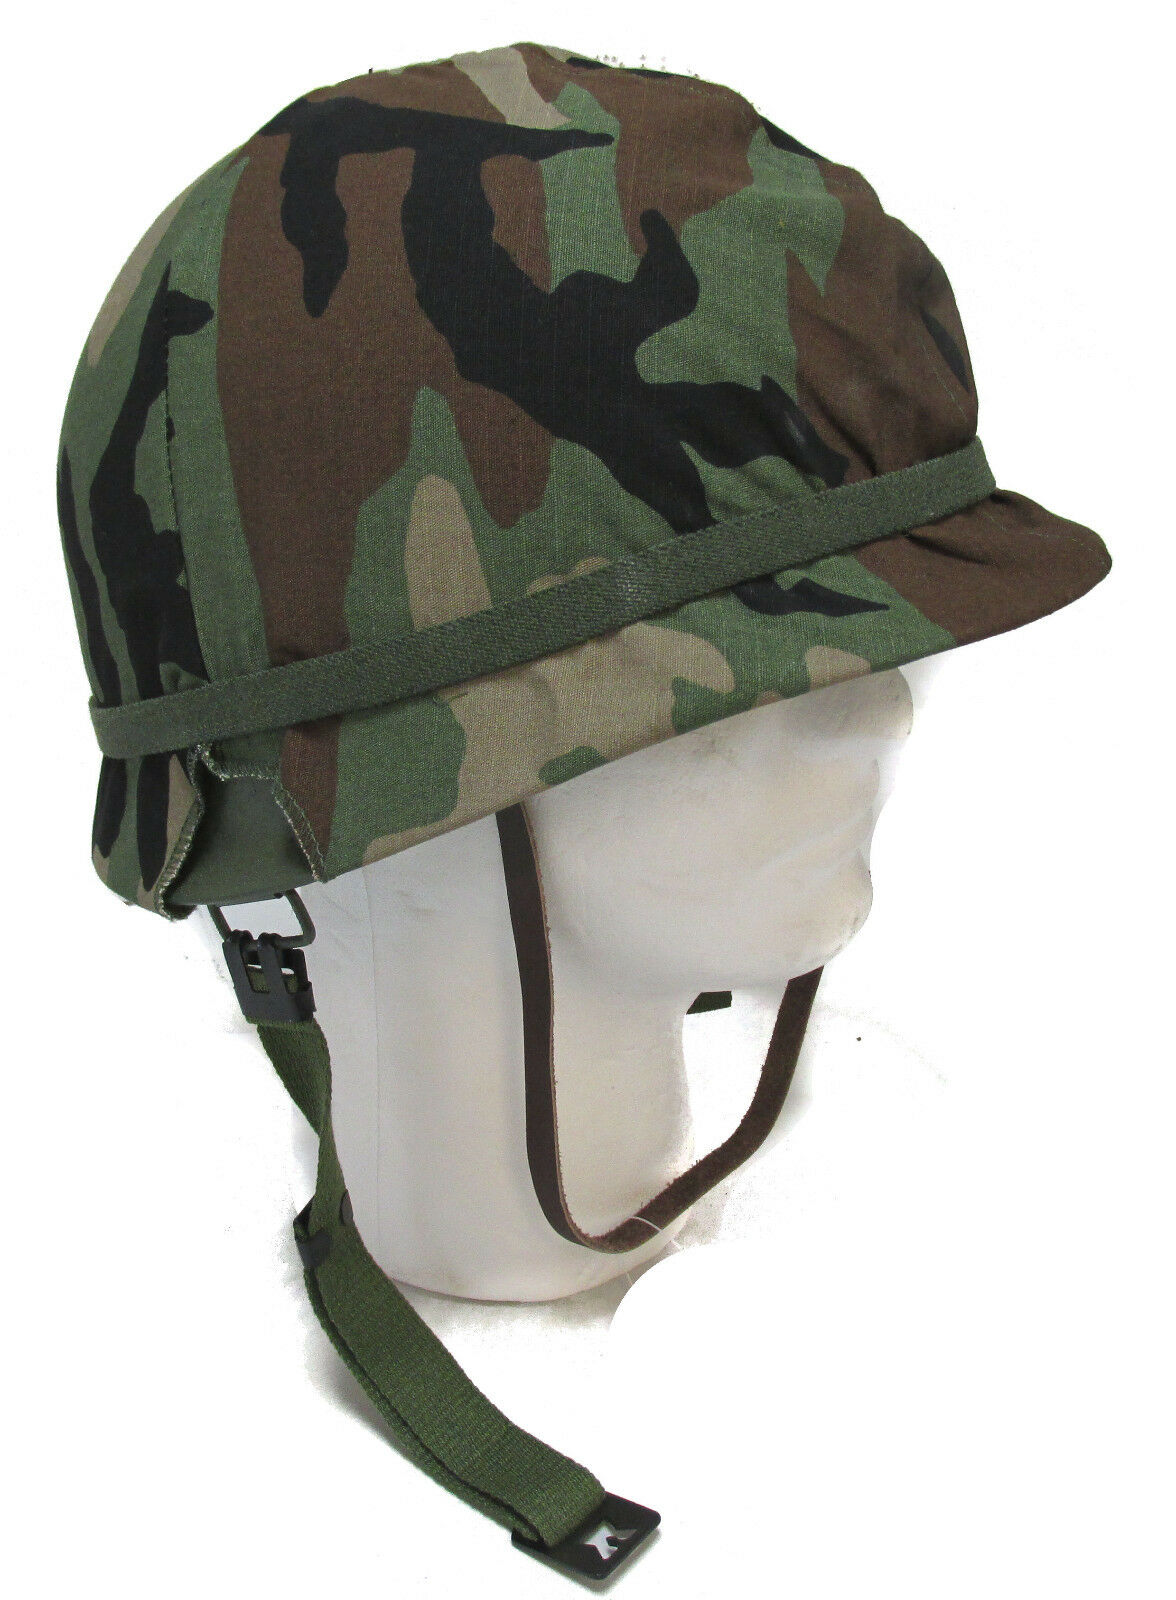 MA1 Adjustable Military Fancy Dress Costume Plastic Army Helmet With Cover